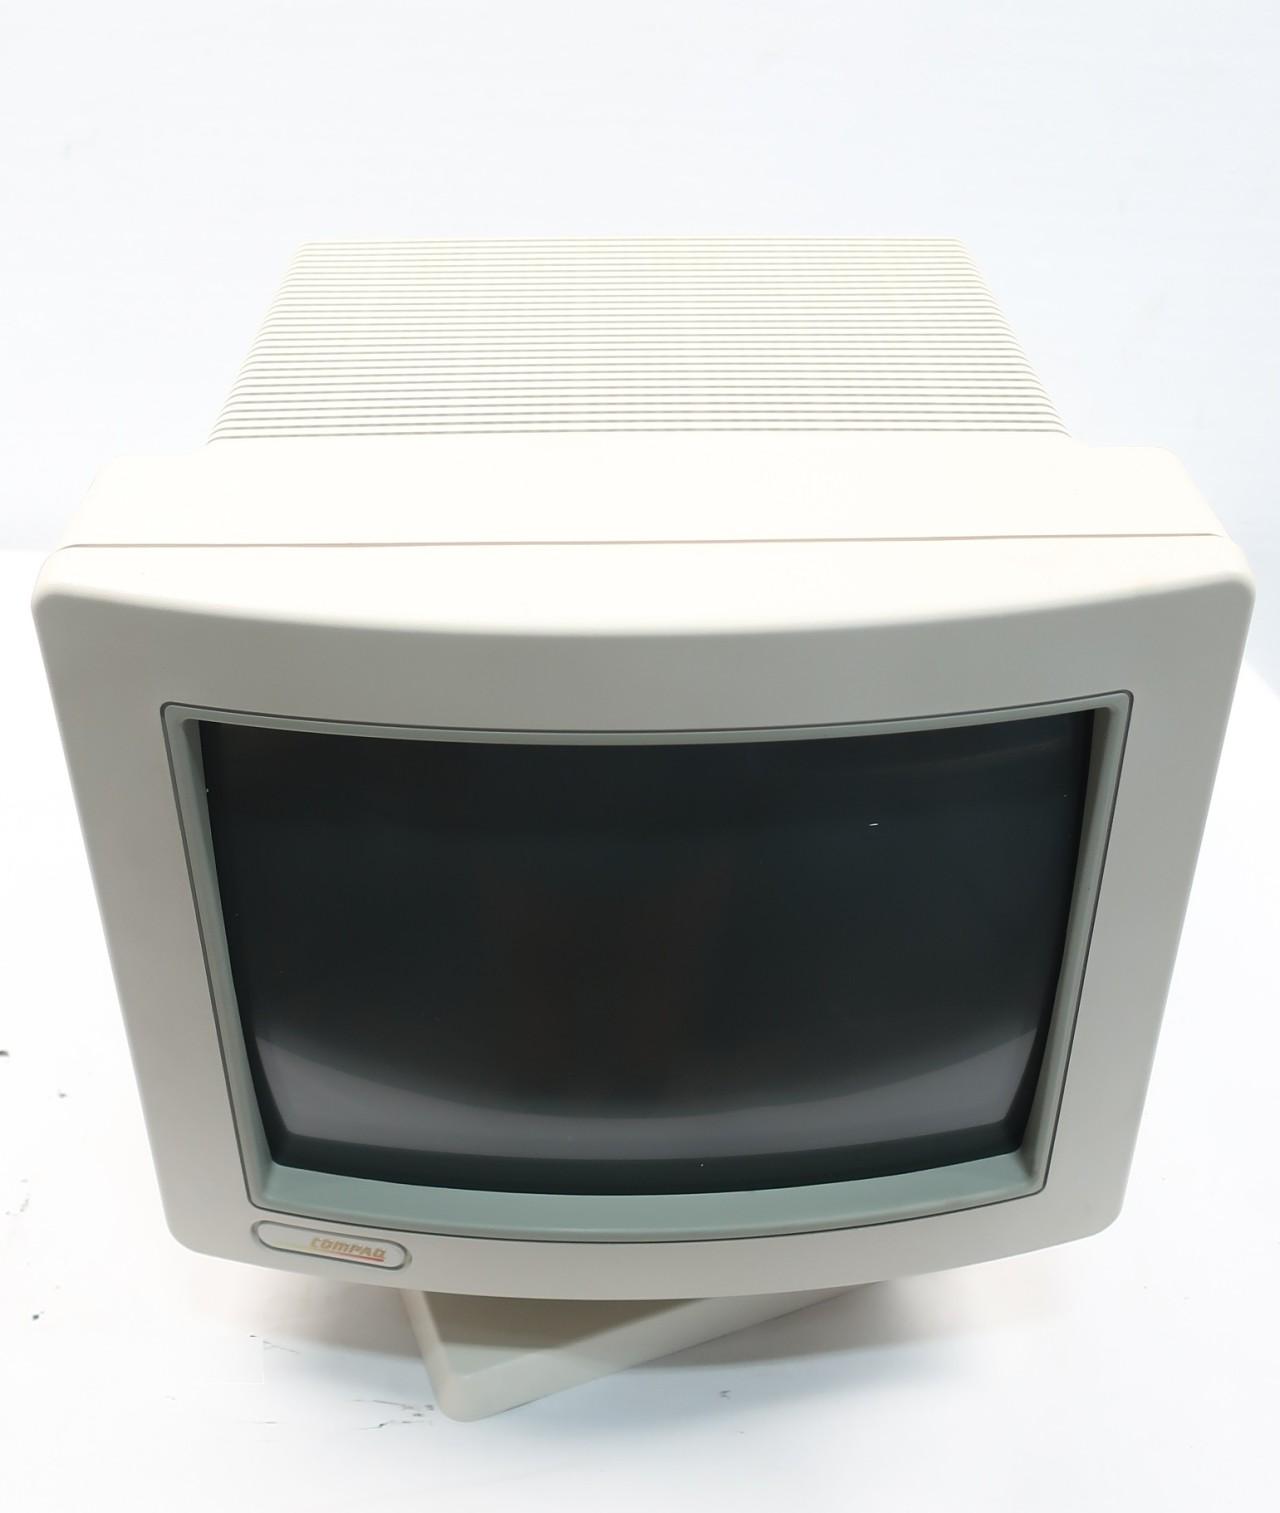 Details about   Compaq 460 141550-002 Video Color Monitor 100-240v-ac 